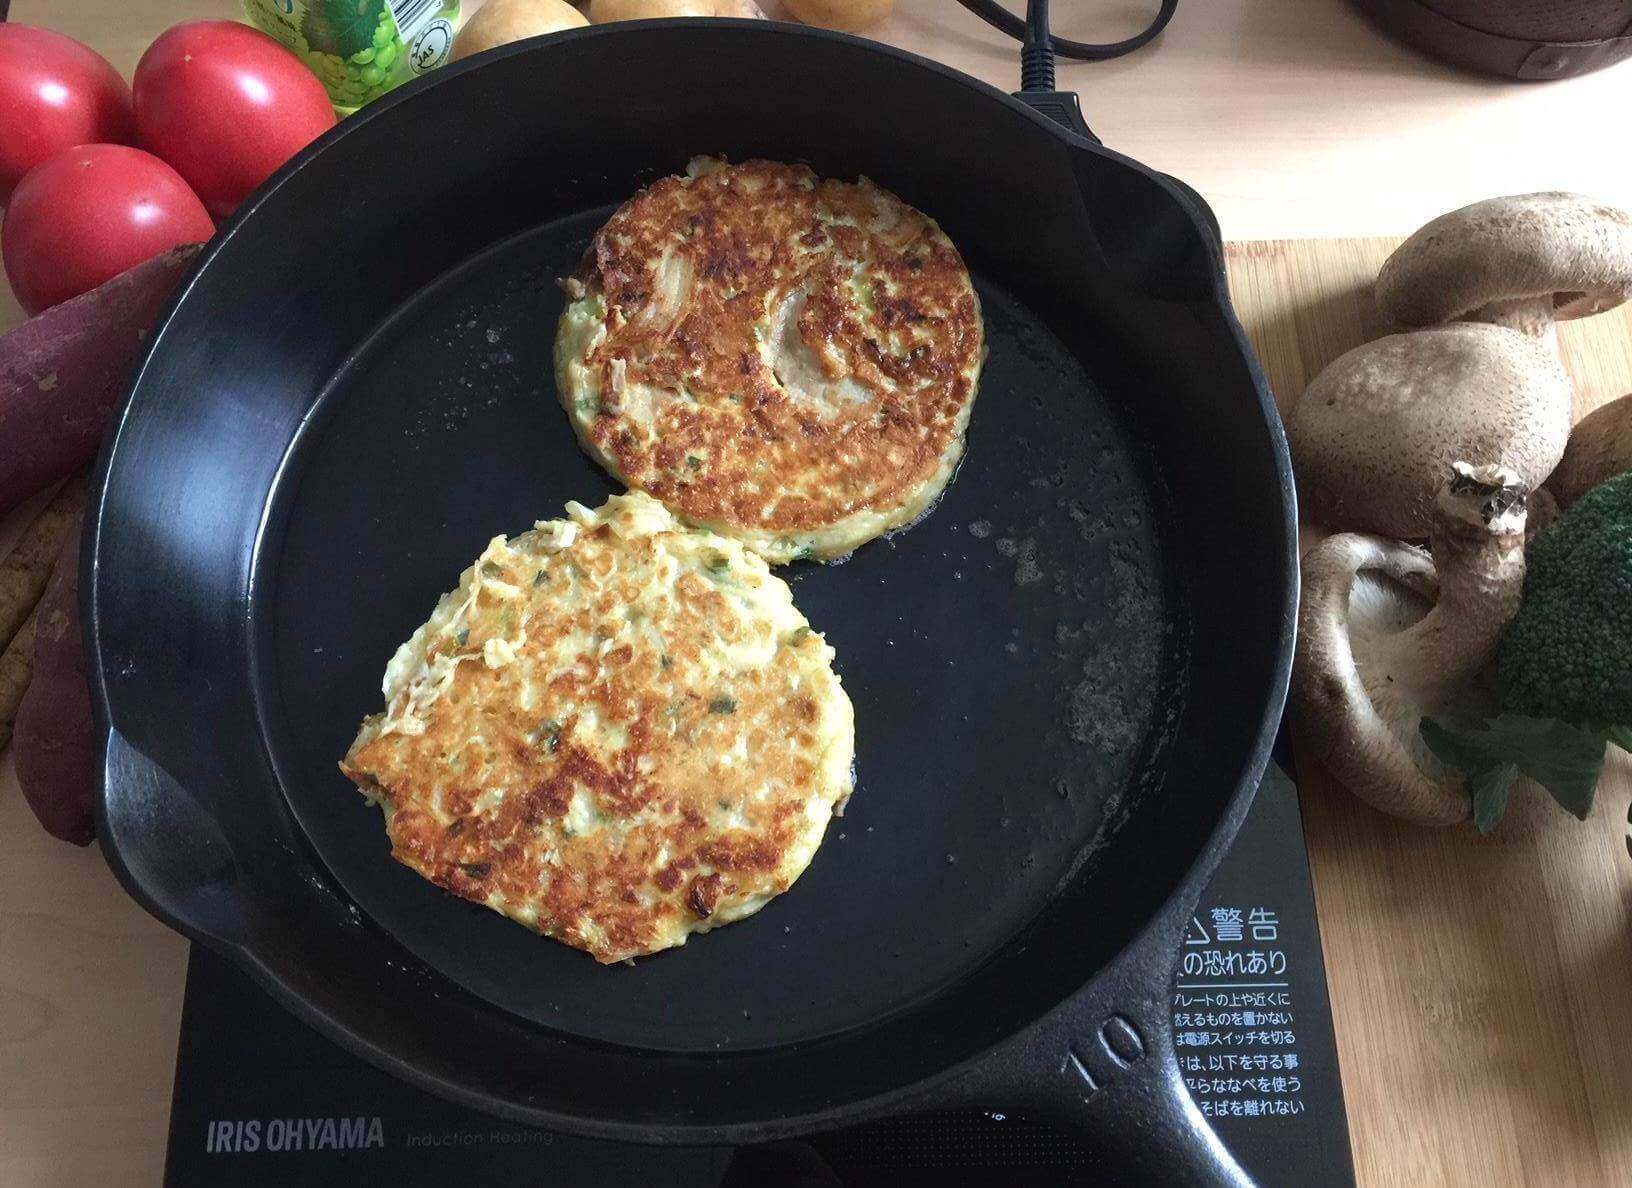 Made pancakes for my kids with my grandma's griswald griddle. : r/castiron